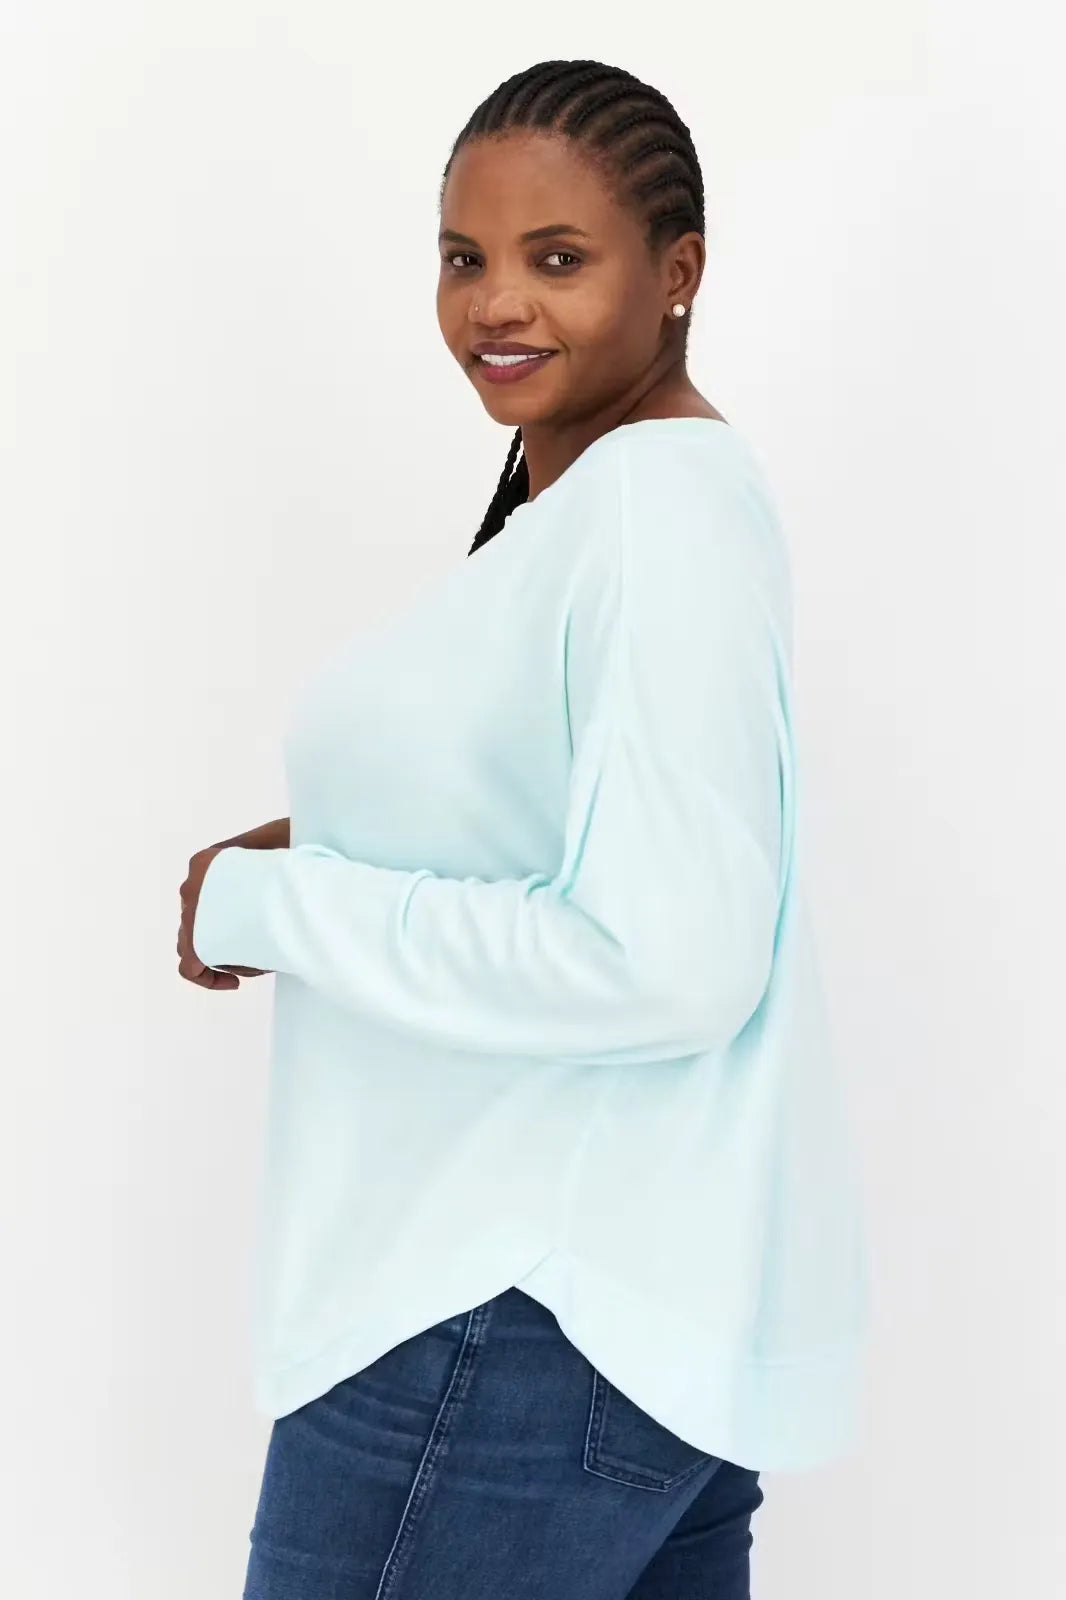 Aqua green, long-sleeve crewneck pullover top made from soft, modal fabric. Model wearing the top with relaxed fit and thumbhole cuffs.